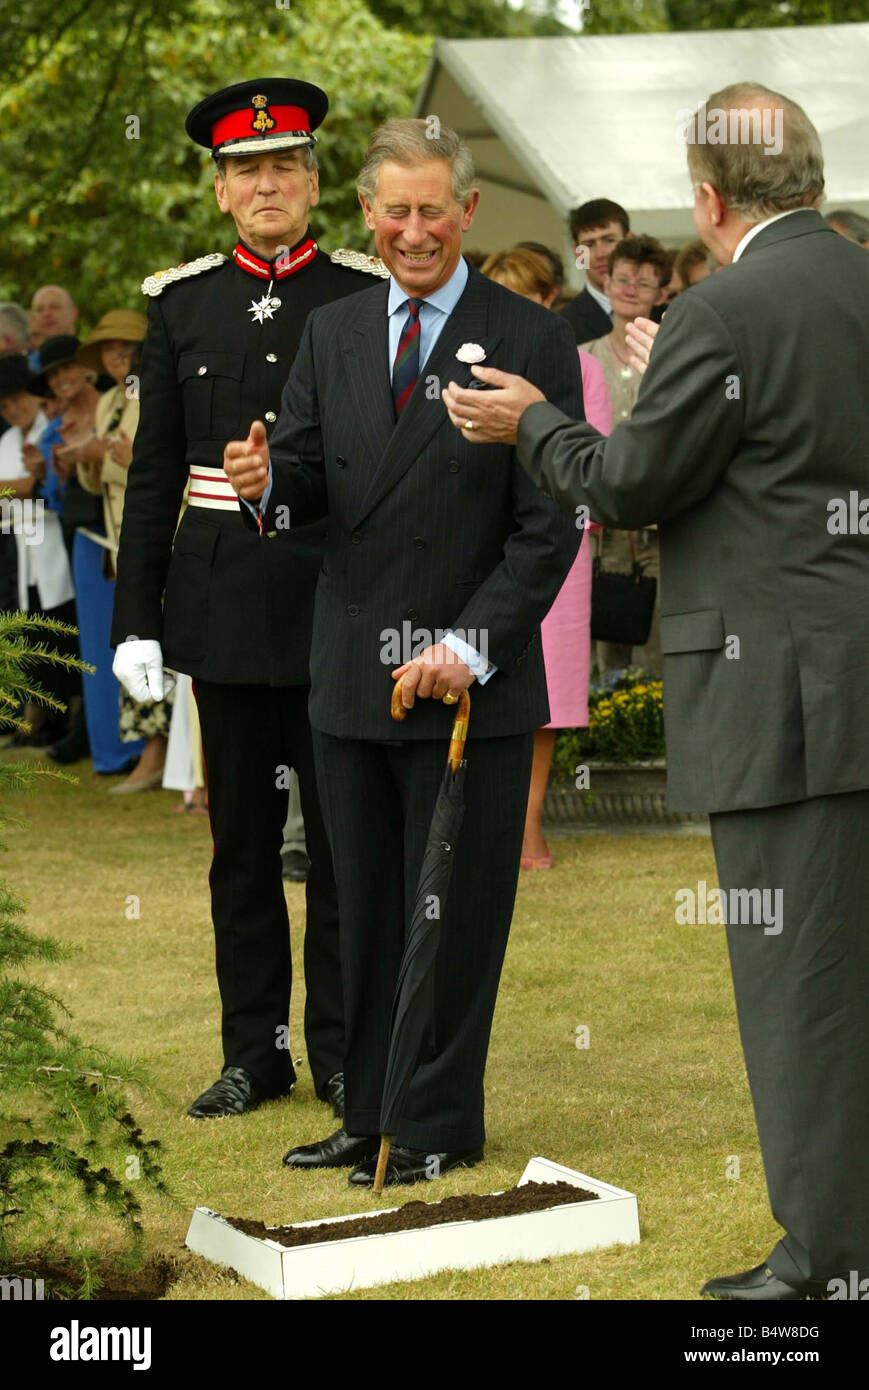 Prince Charles At Hillsborough Castle Garden Party Sept 2003 Secretary of State Paul Murphy applauds the tree planting by Prince Charles at Hillsborough Castle Stock Photo